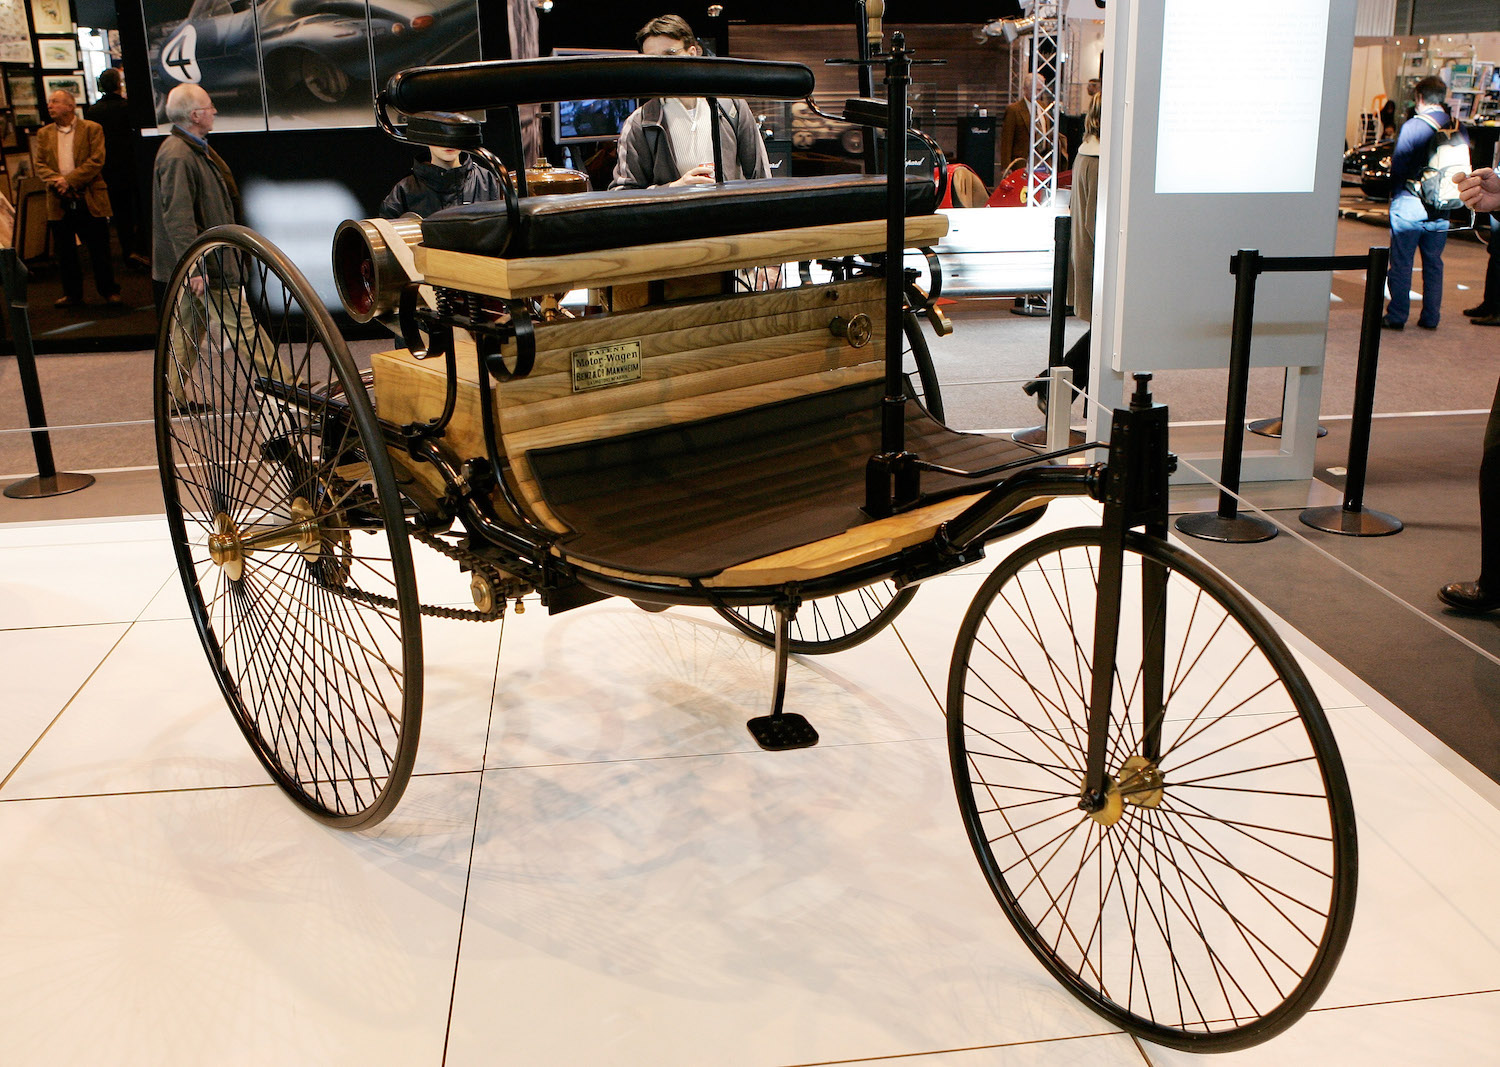 1886 Benz Patent Motorwagen. This was the first gas-powered car, but both steam vehicles and electric vehicles predated it.  | Francois Durand/Getty Images